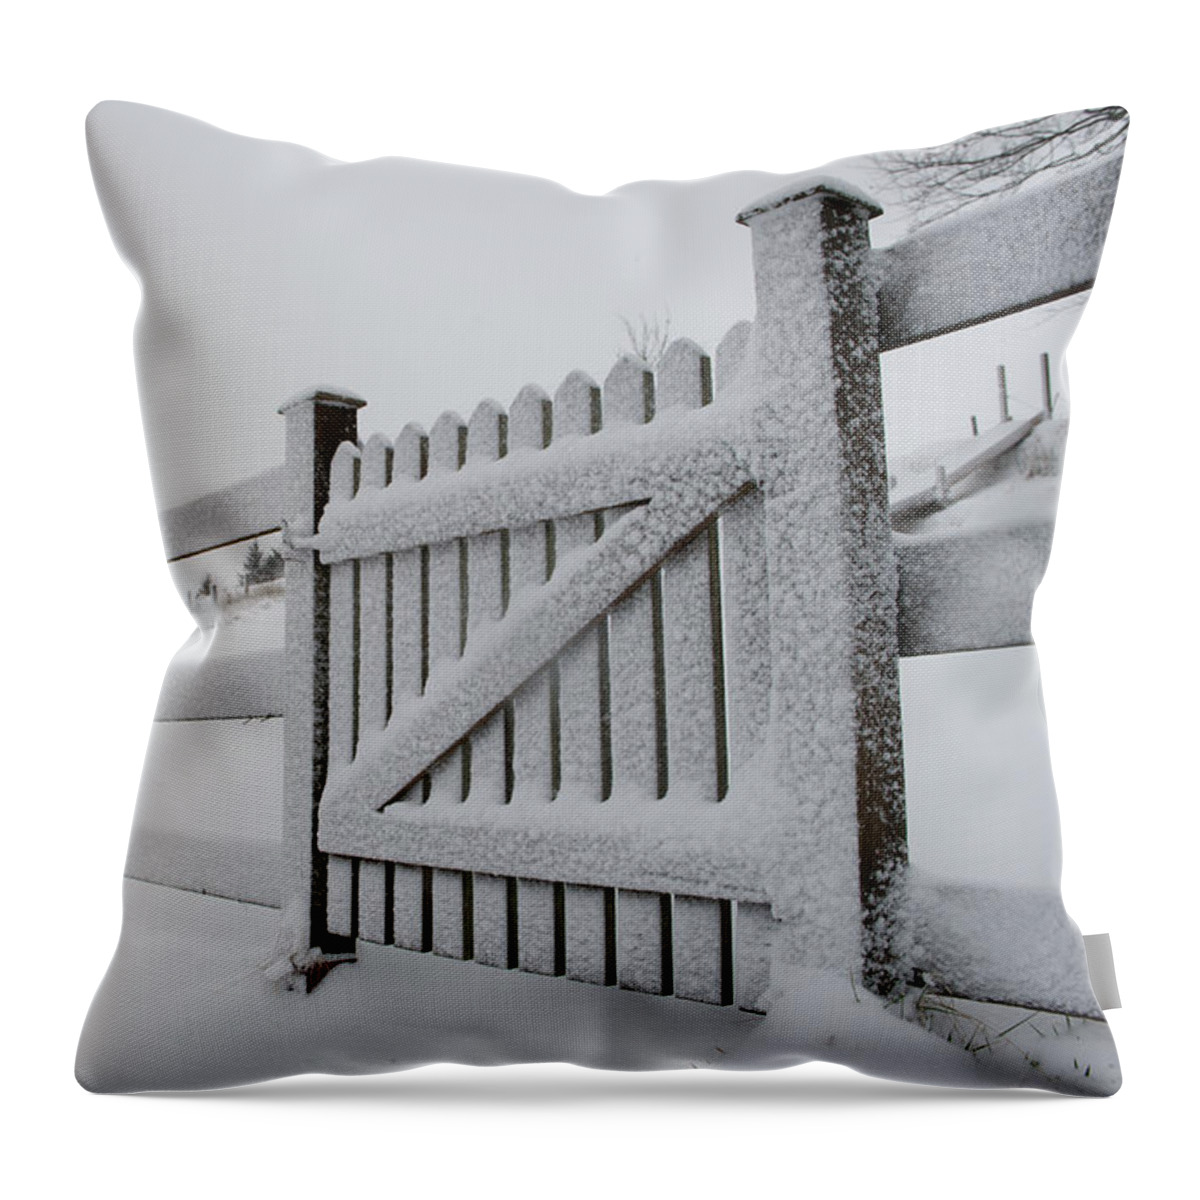 Snow Throw Pillow featuring the photograph Snow Covered Gate by Helen Jackson